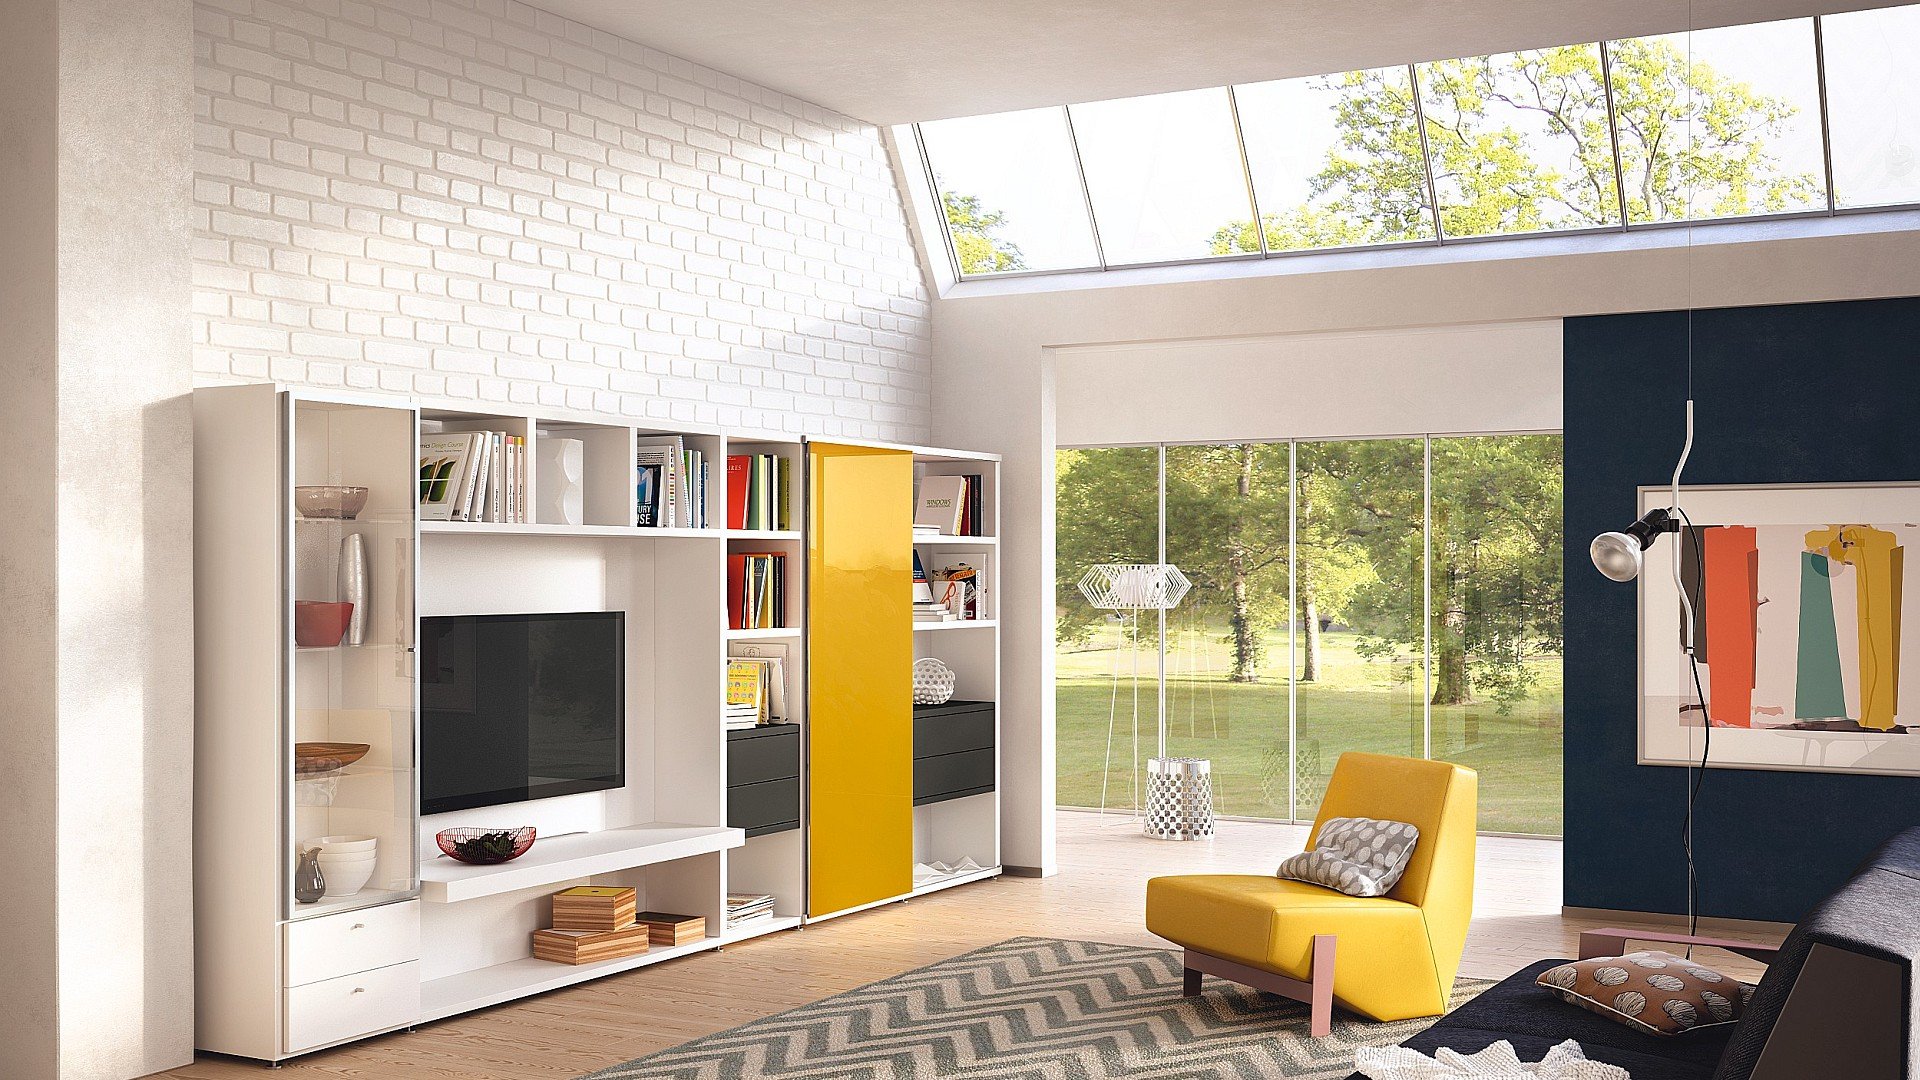 Snow-white modular system for a living room with brick walls